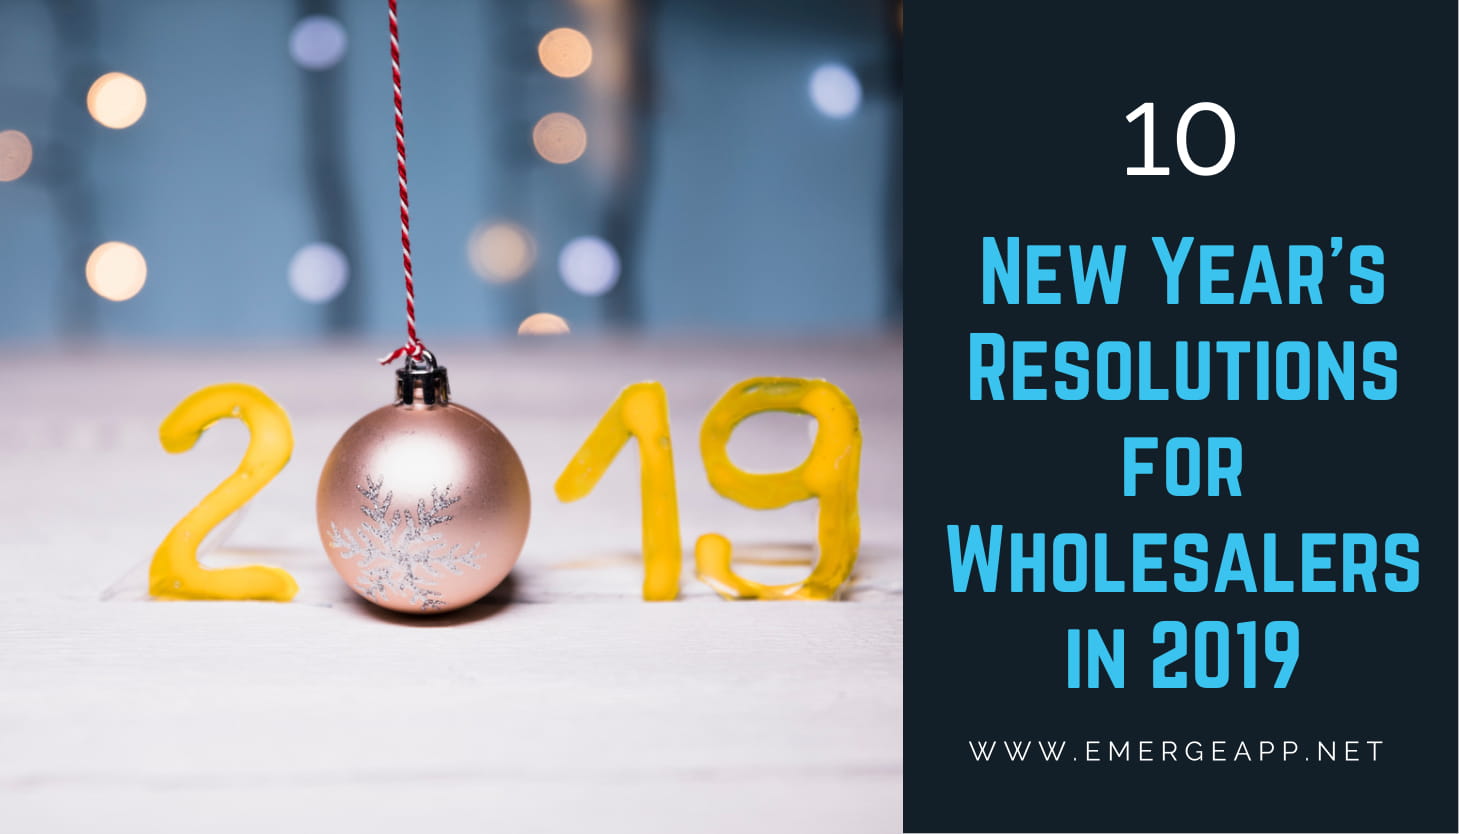 New Year Resolutions for Wholesalers